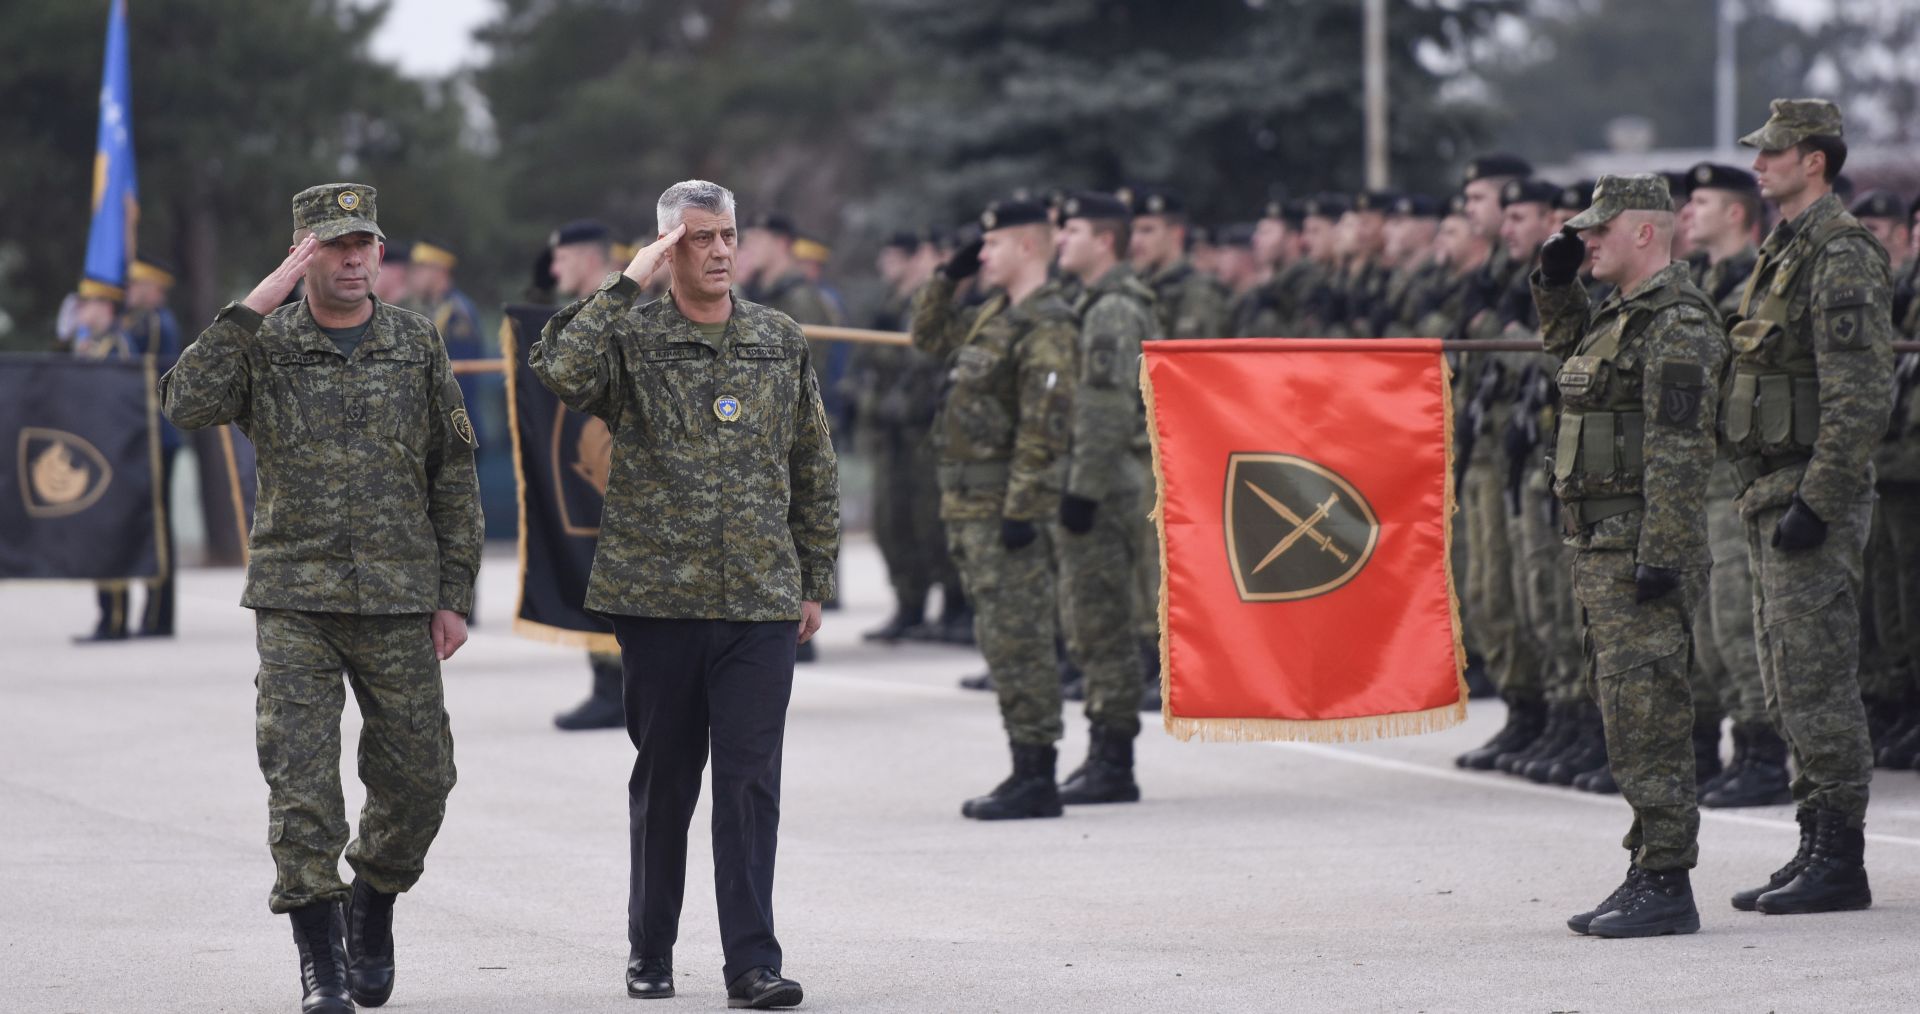 epa07228847 President of the Republic of Kosovo Hashim Thaci (C) inspects Members of the Kosovo Security Force (KSF) in Pristina, Kosovo, 13 December 2018. The 120 seat parliament of the Republic of Kosovo is expected to vote for the laws to transform the Security Forces into an official army during the plenary session on 14 December. Parliament in Kosovo, which relies on NATO troops for its protection, voted on 18 October 2018 to set up a 5,000-strong national army though its Serb minority said the move was illegal.  EPA/STRINGER